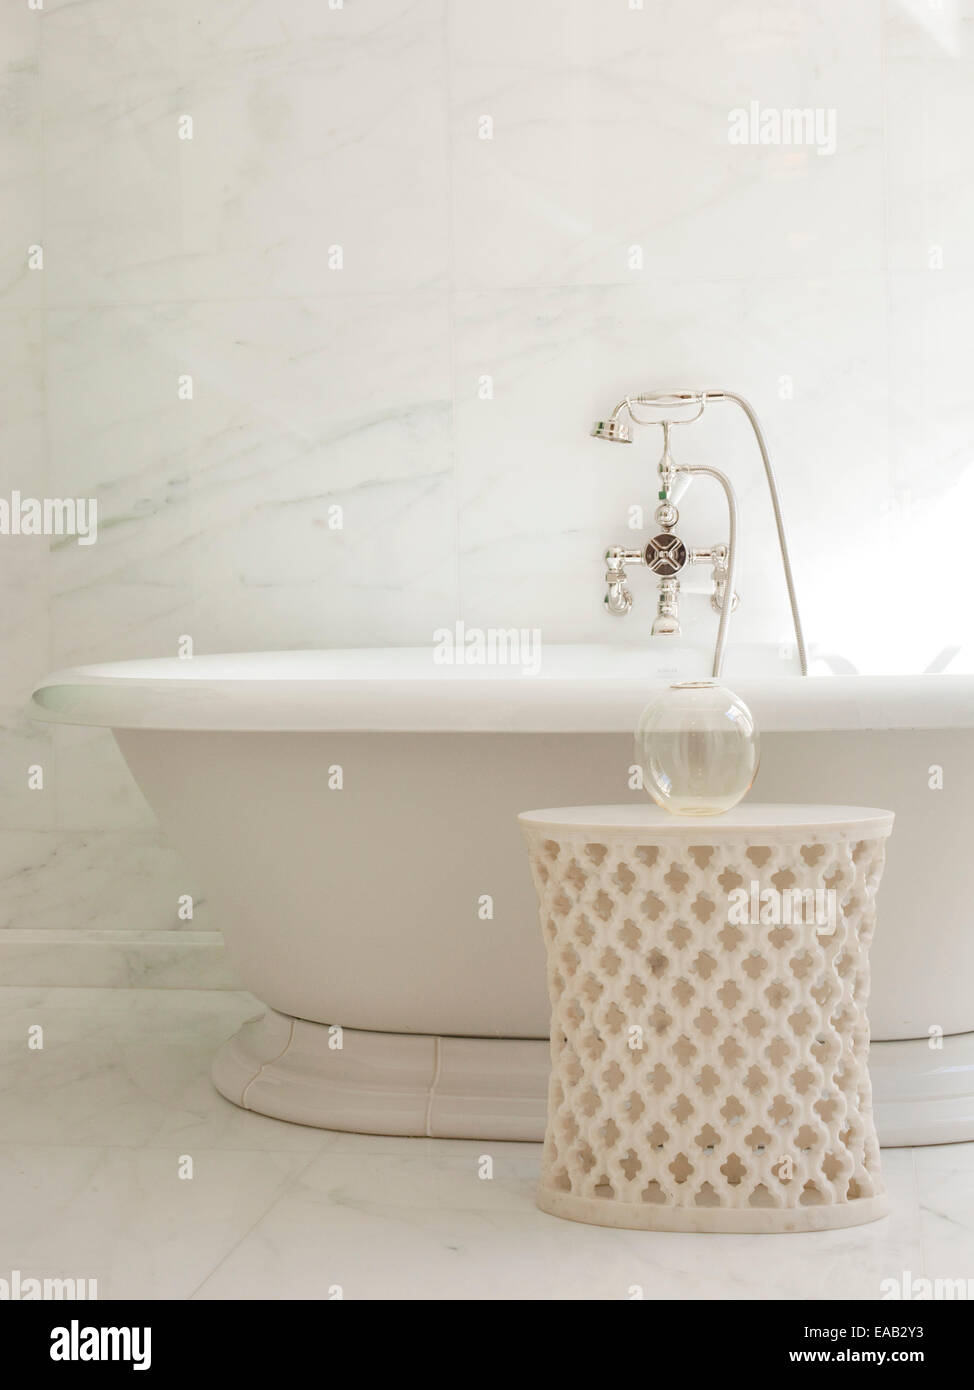 detail of marble bathtub and faucet Stock Photo